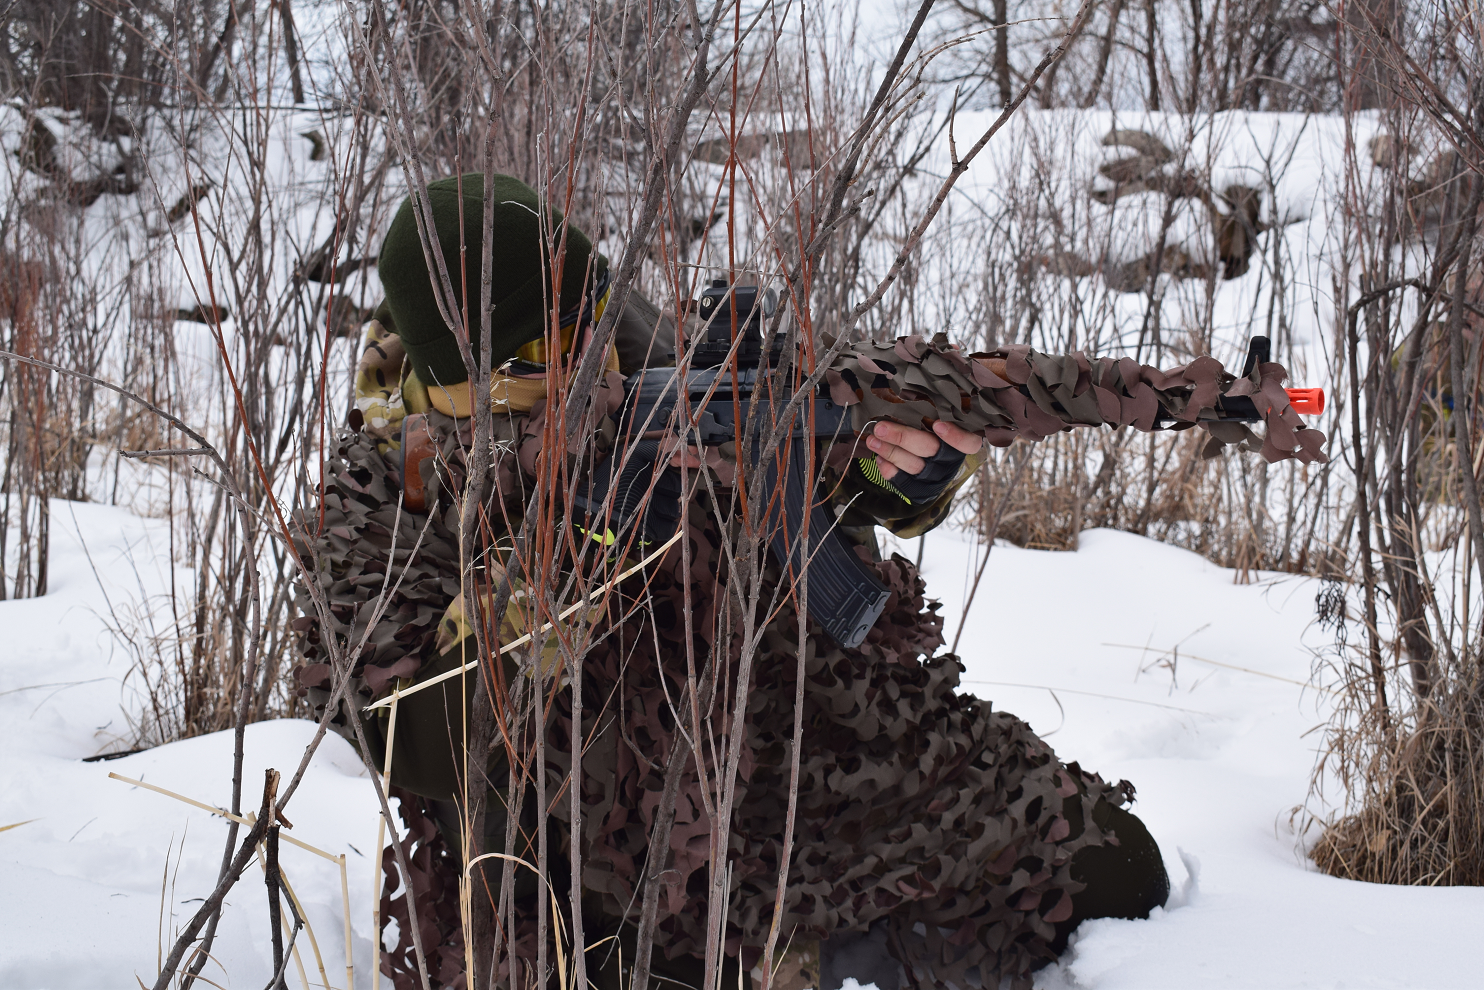 Airsoft sniper in a ghillie suit crouching in a snowy environment, blending into the surroundings while aiming a rifle.